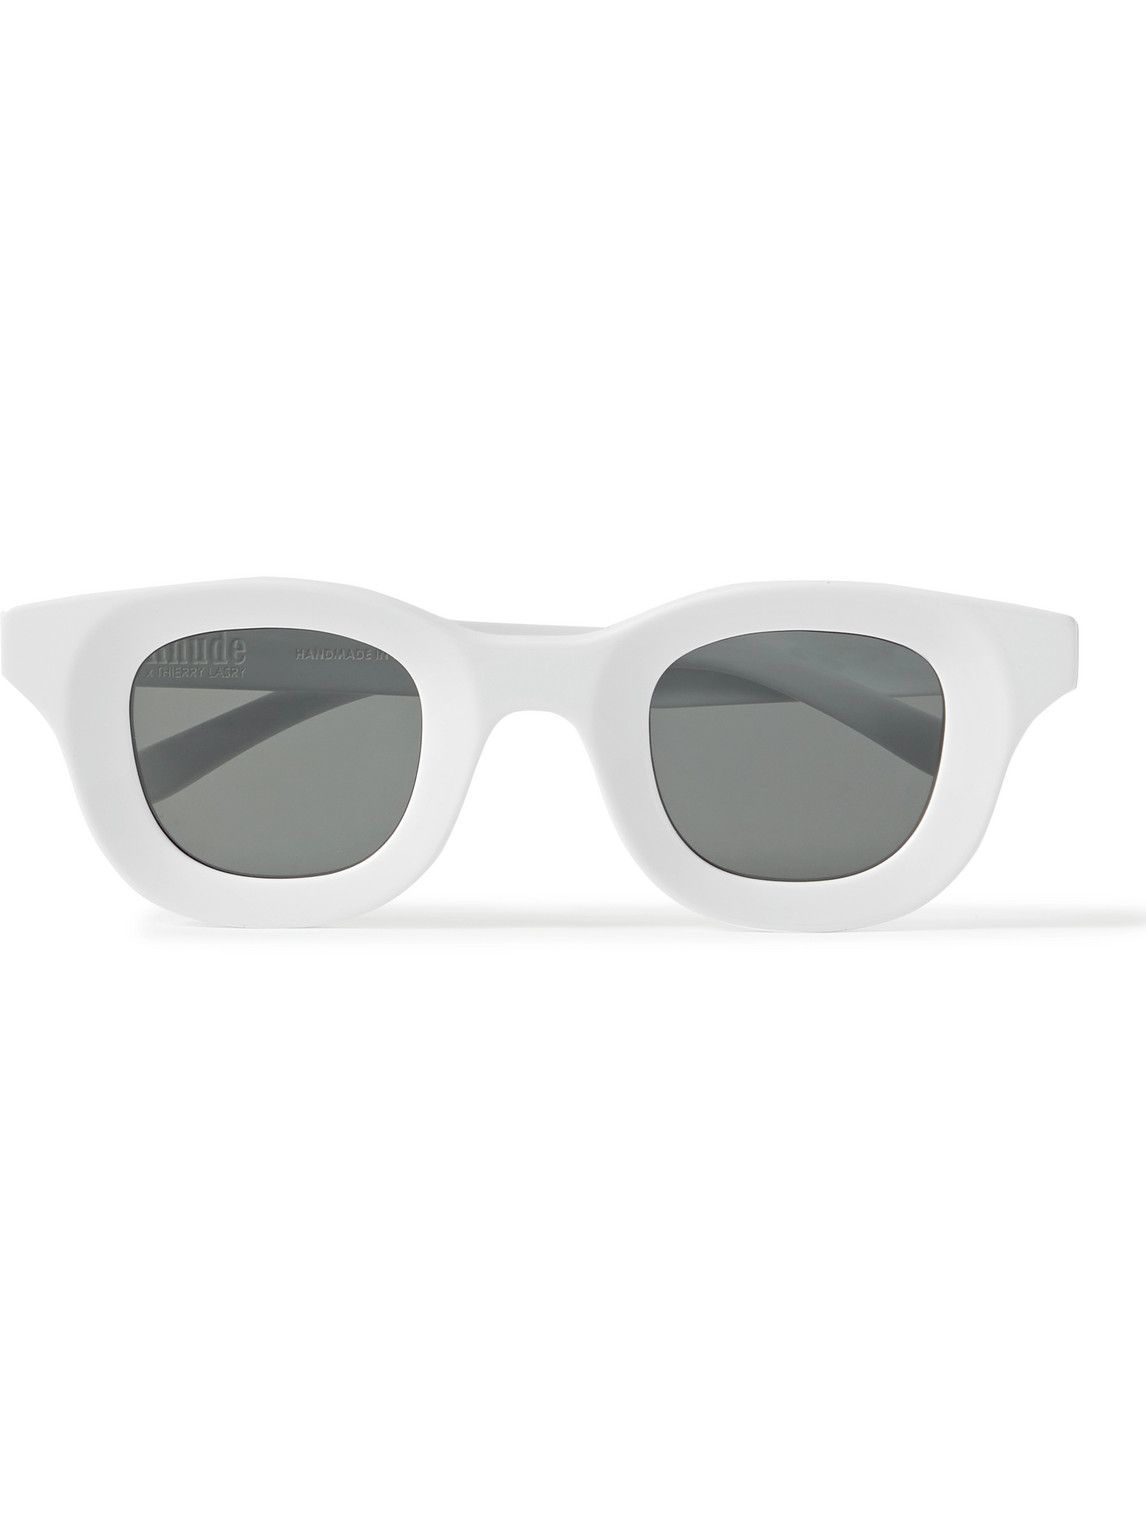 Rhude - Thierry Lasry Rhodeo D-Frame Acetate Sunglasses Rhude